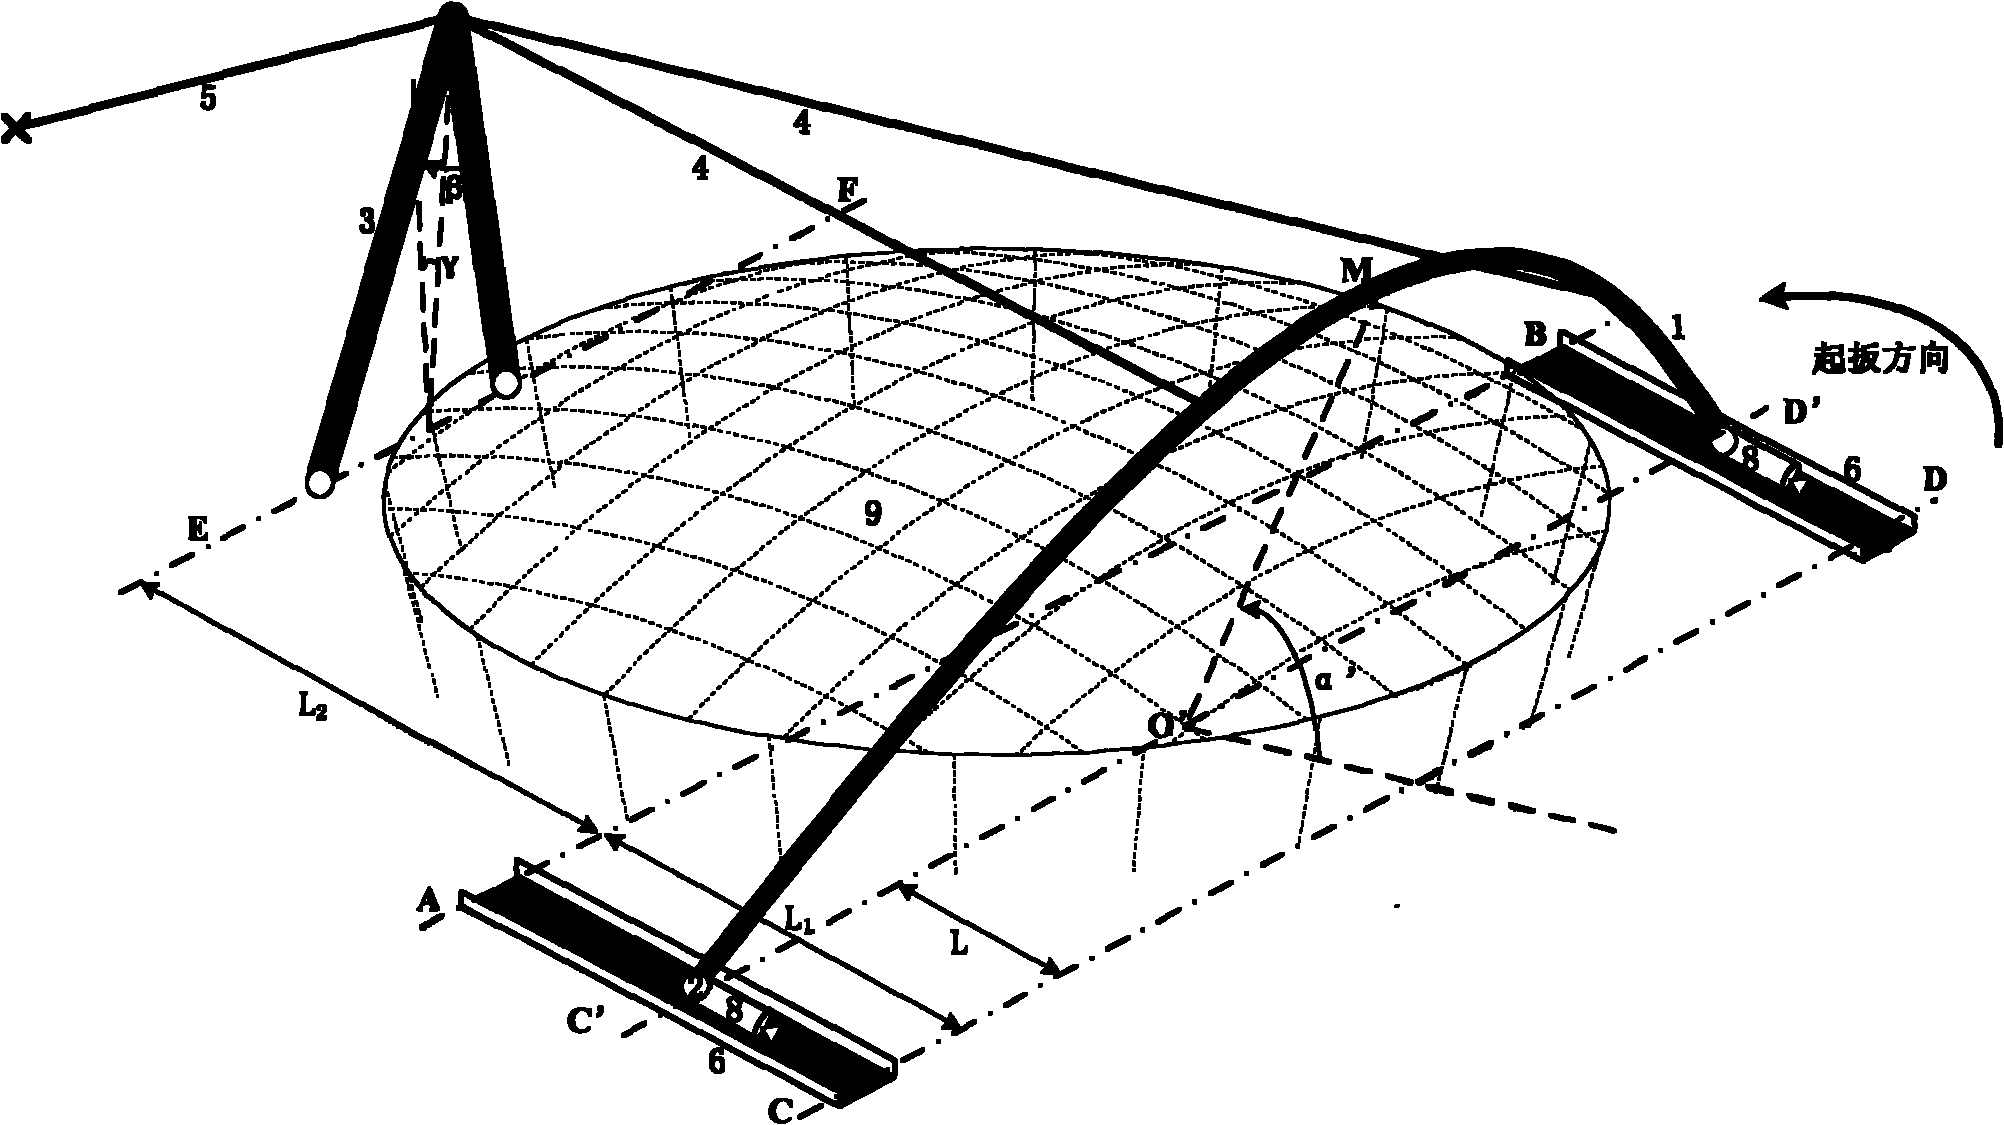 Construction method of integrally rotating, drawing up and slipping large steel arch structure